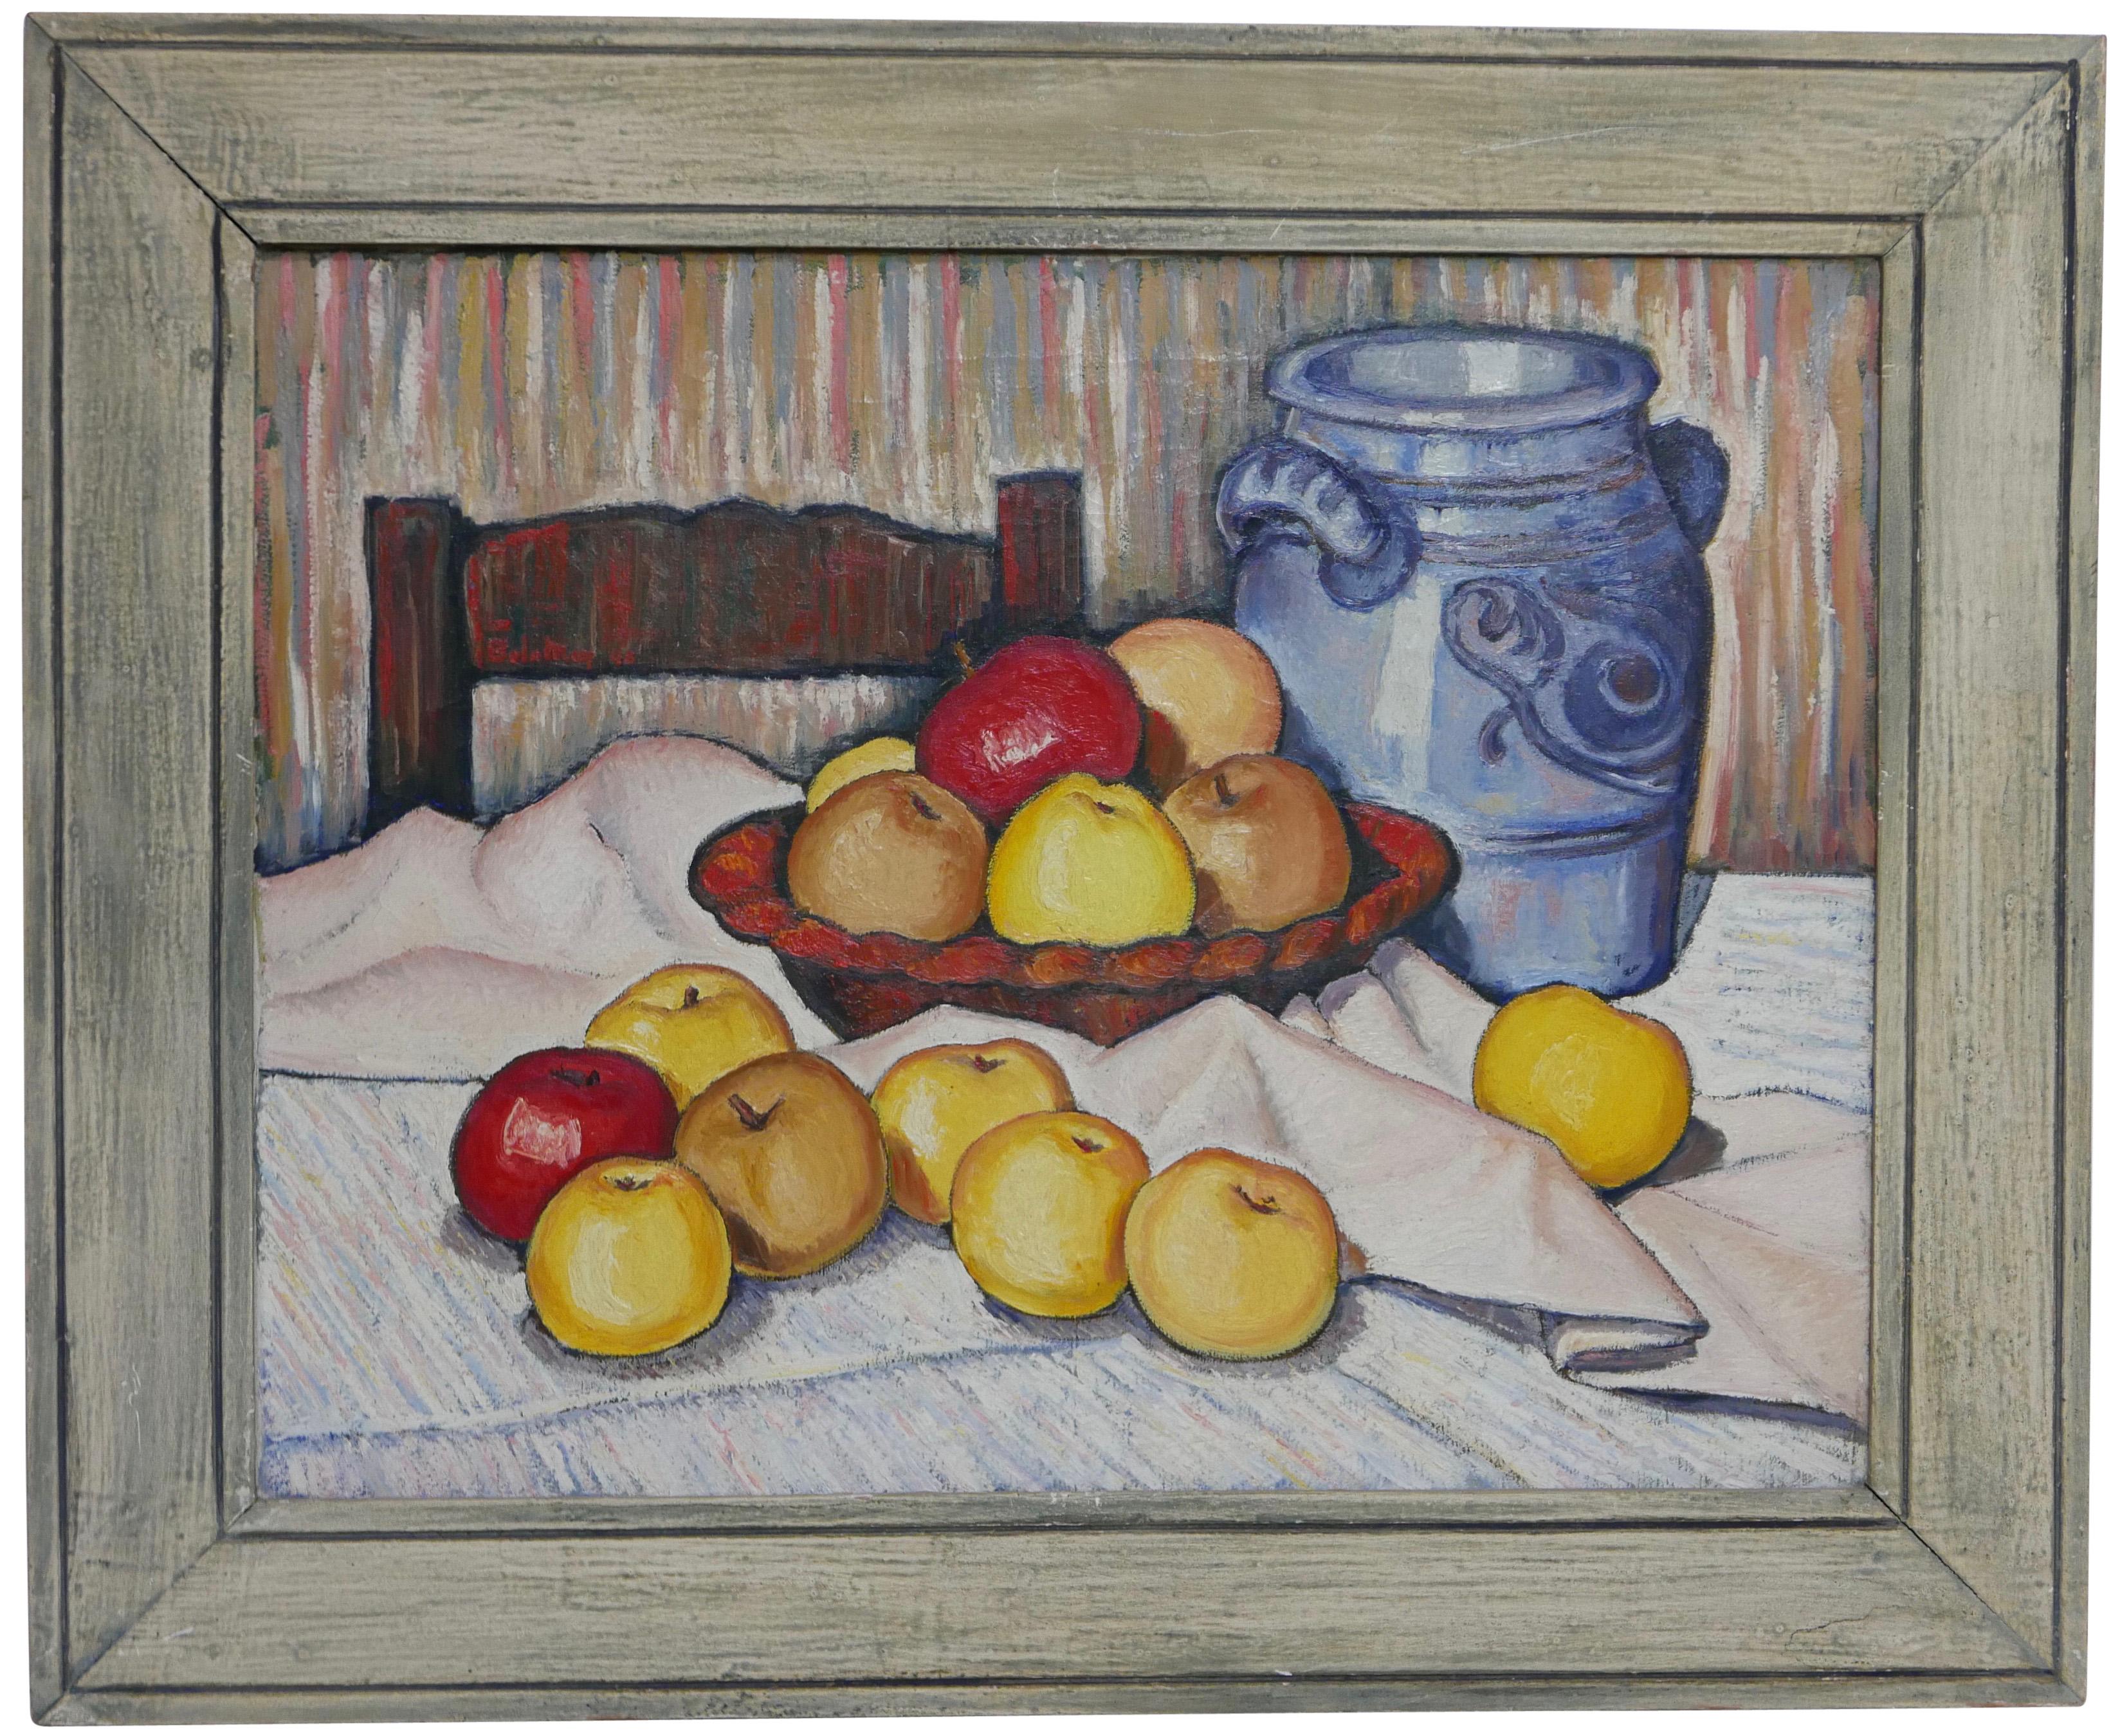 Pair of Mid-20th Century Still Life Paintings of Fruit Signed Bolomey, 1948 For Sale 3